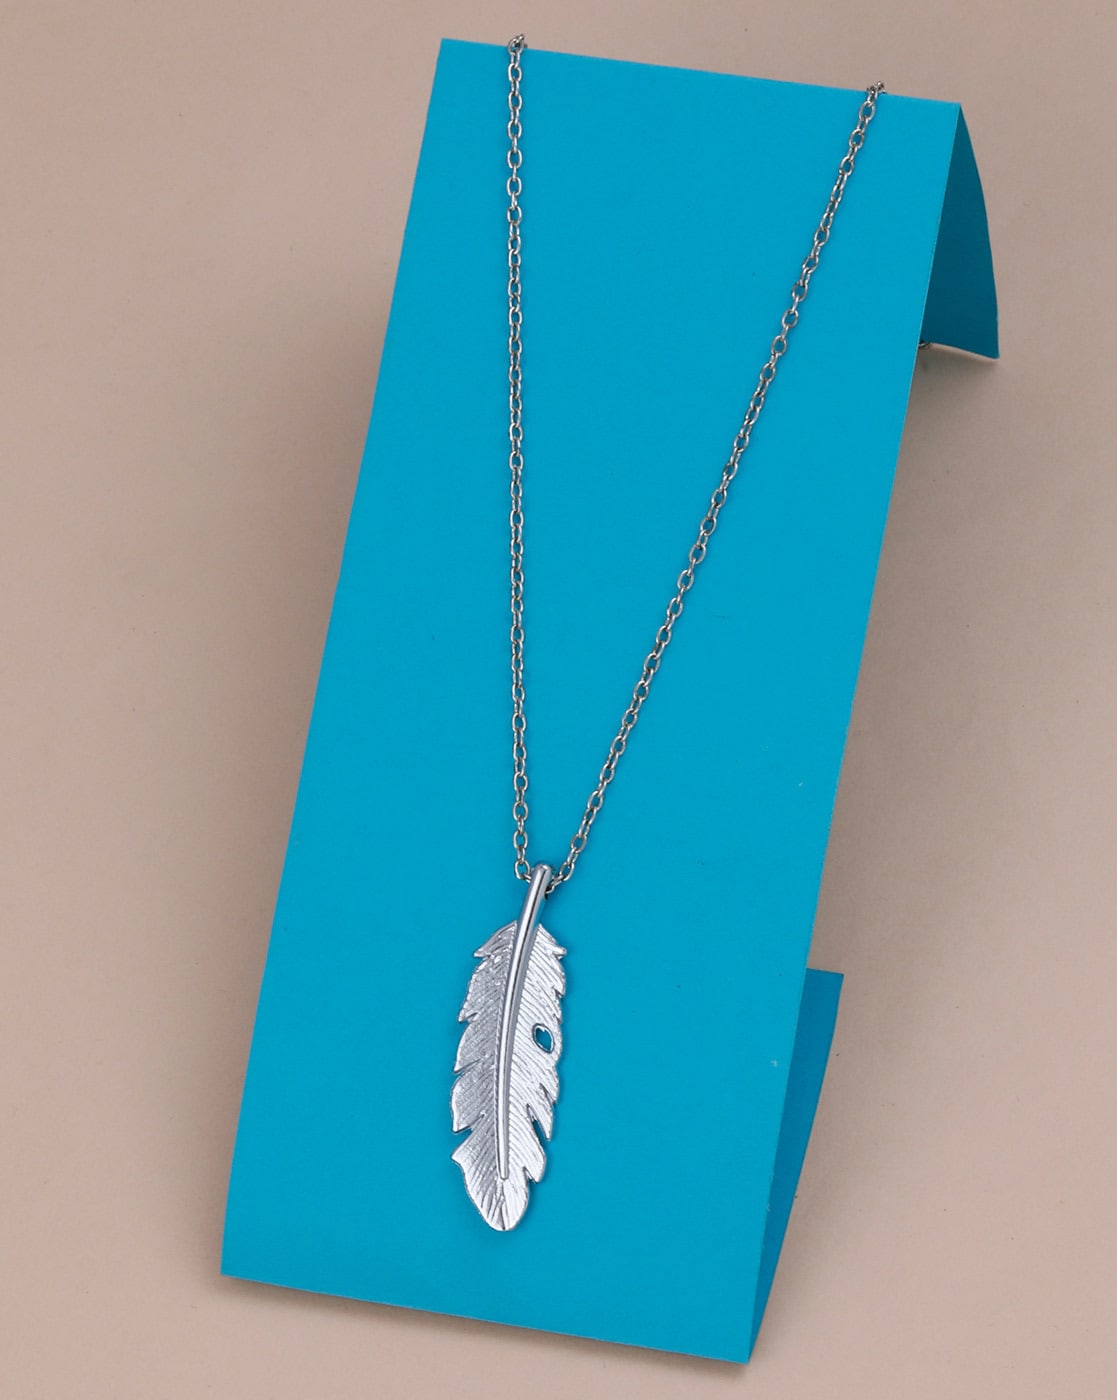 Details more than 85 necklace with feathers - POPPY